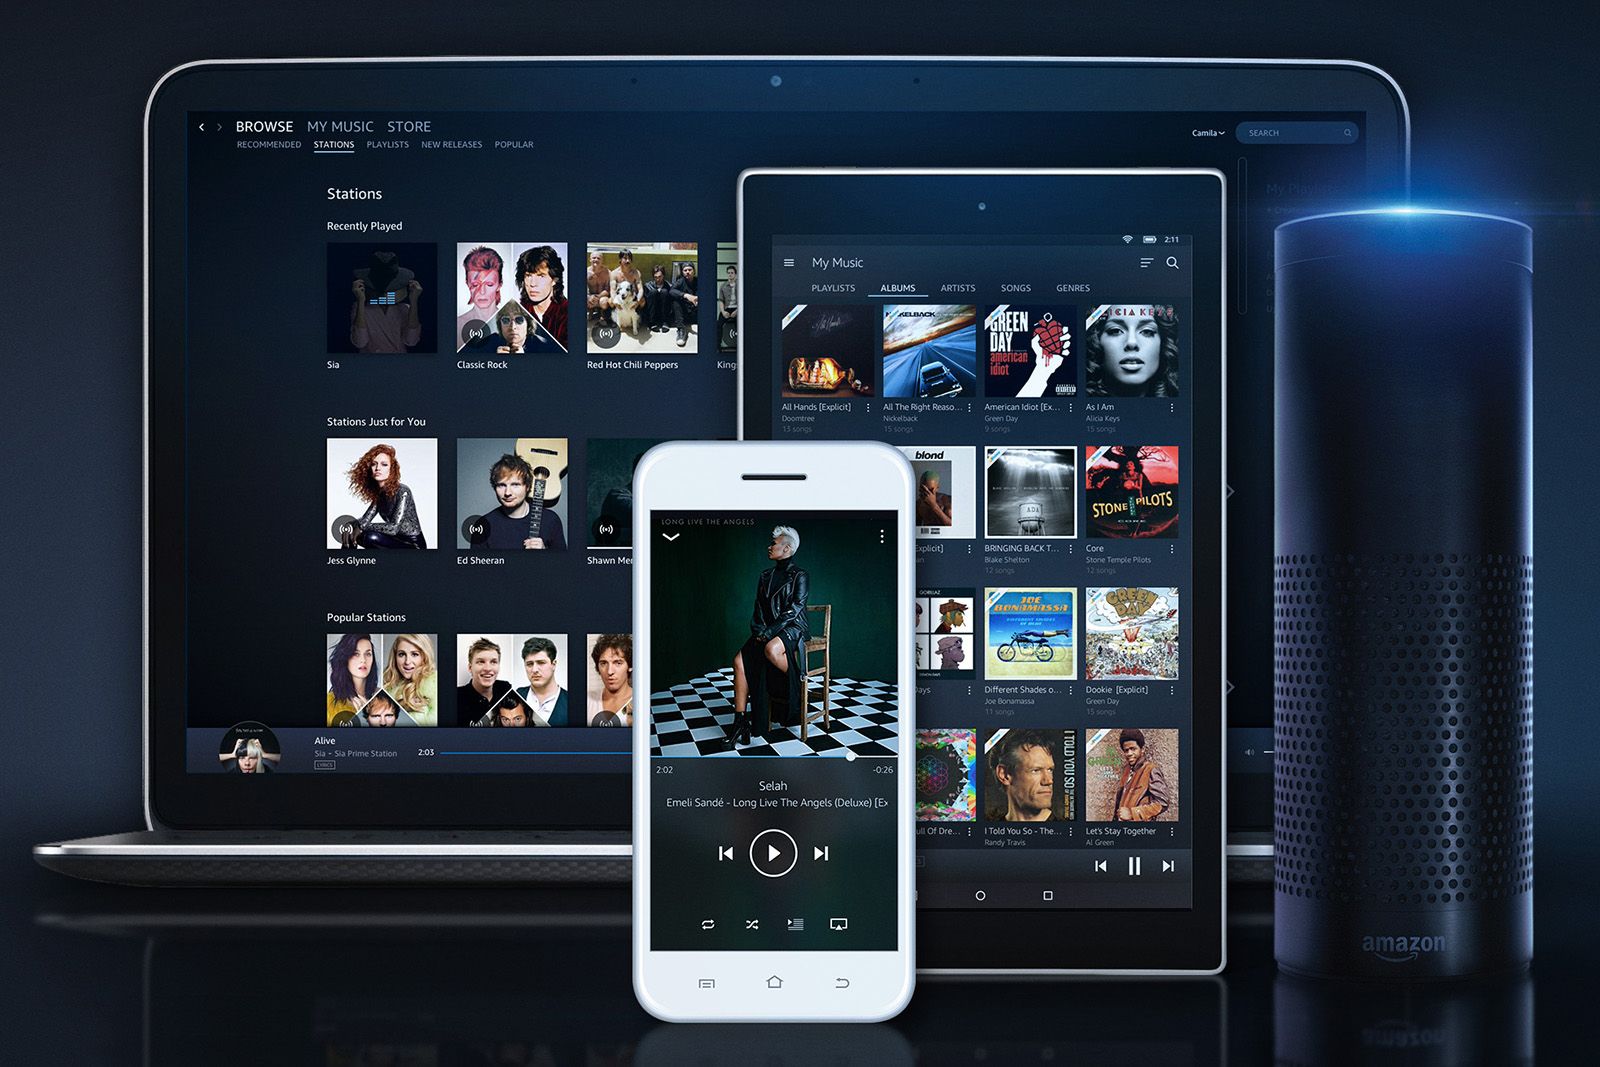 You can now listen to Amazon Music for free on iOS Android and Fire TV image 1